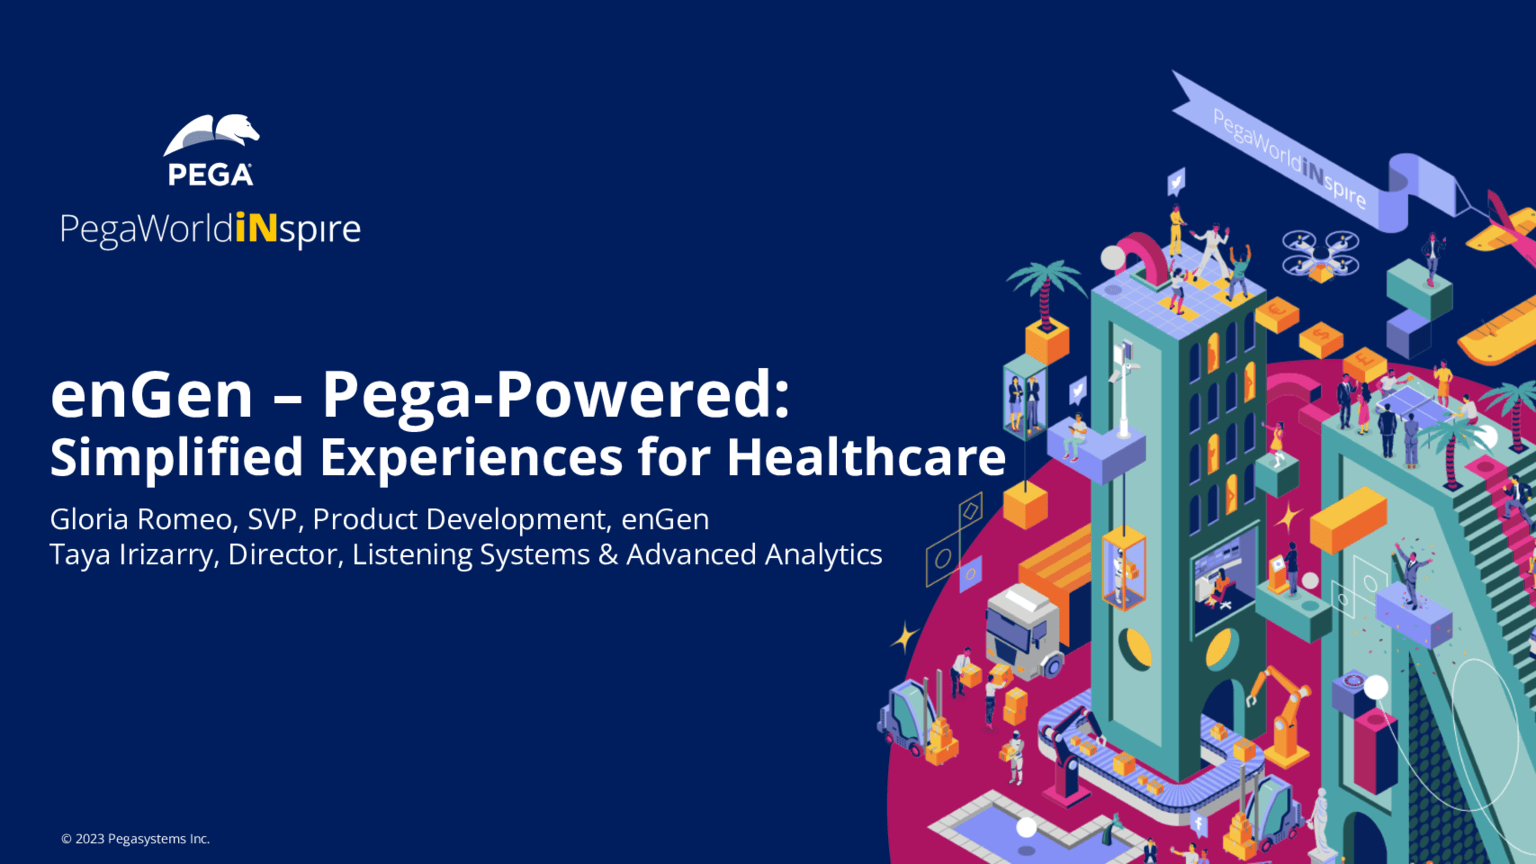 PegaWorld iNspire 2023: enGEN: Pega-powered Simplified Experiences for Healthcare (Presentation)